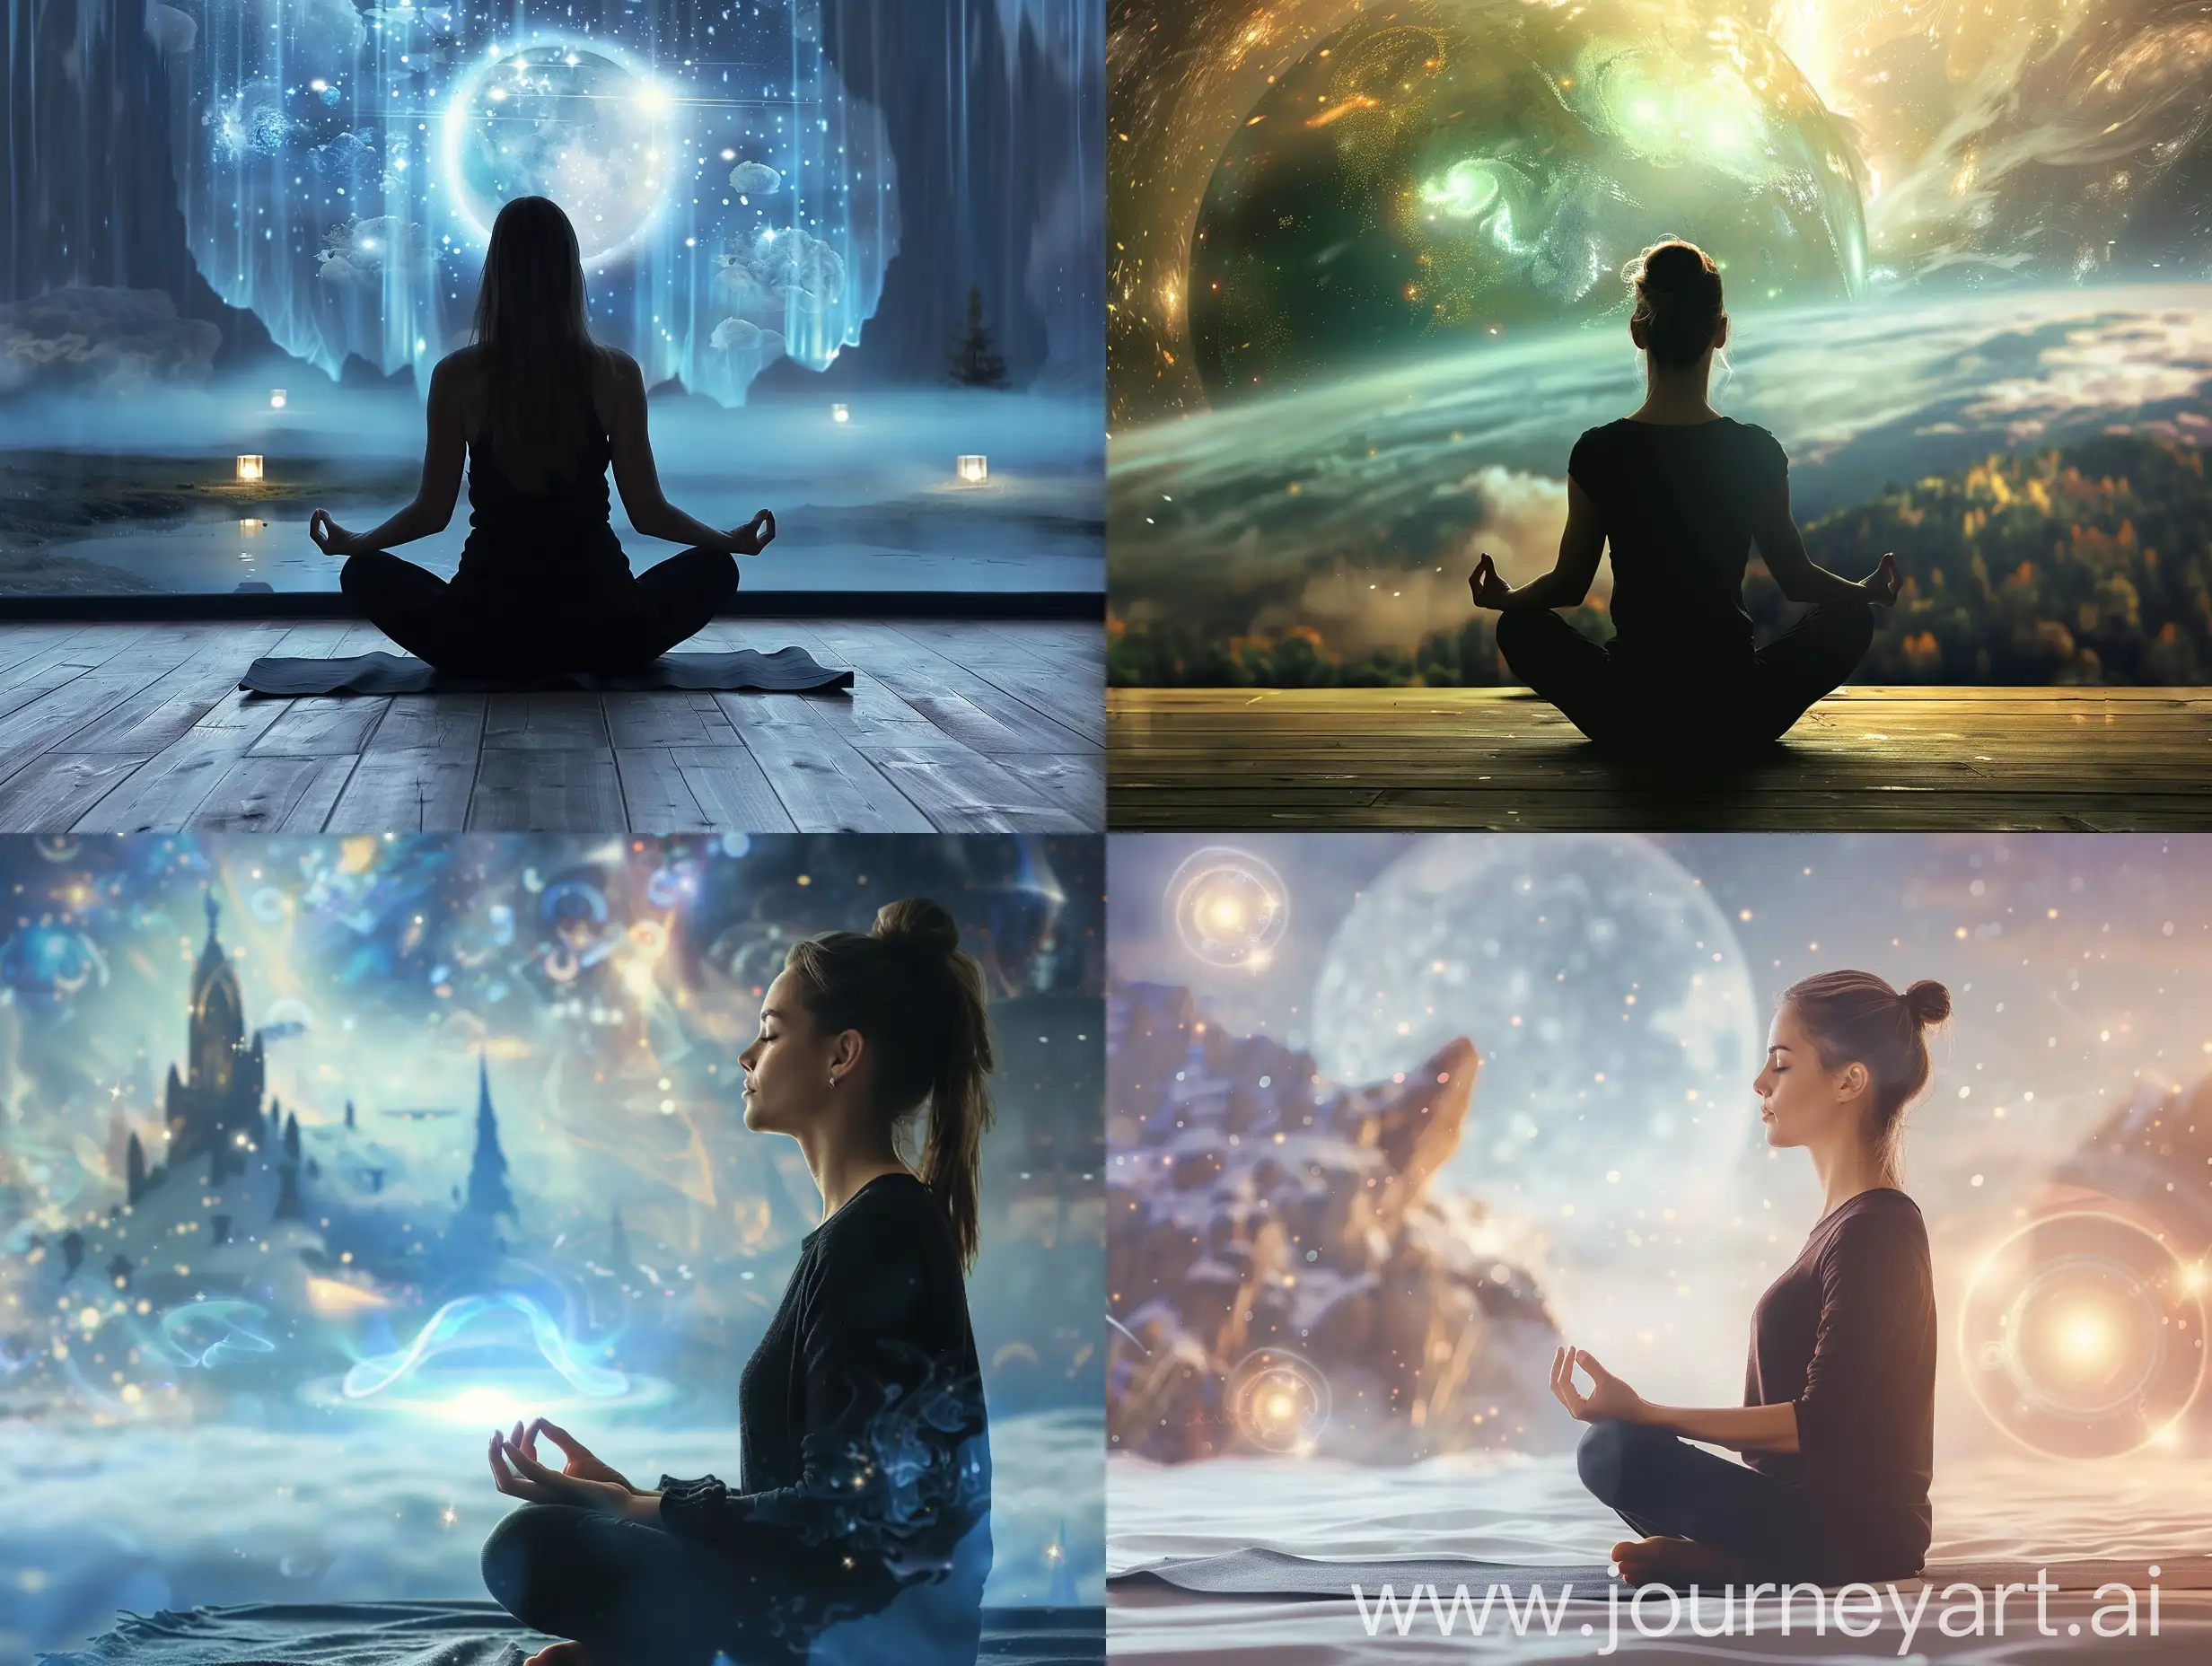 Mystical-Meditation-Woman-Contemplates-in-Enigmatic-Realm